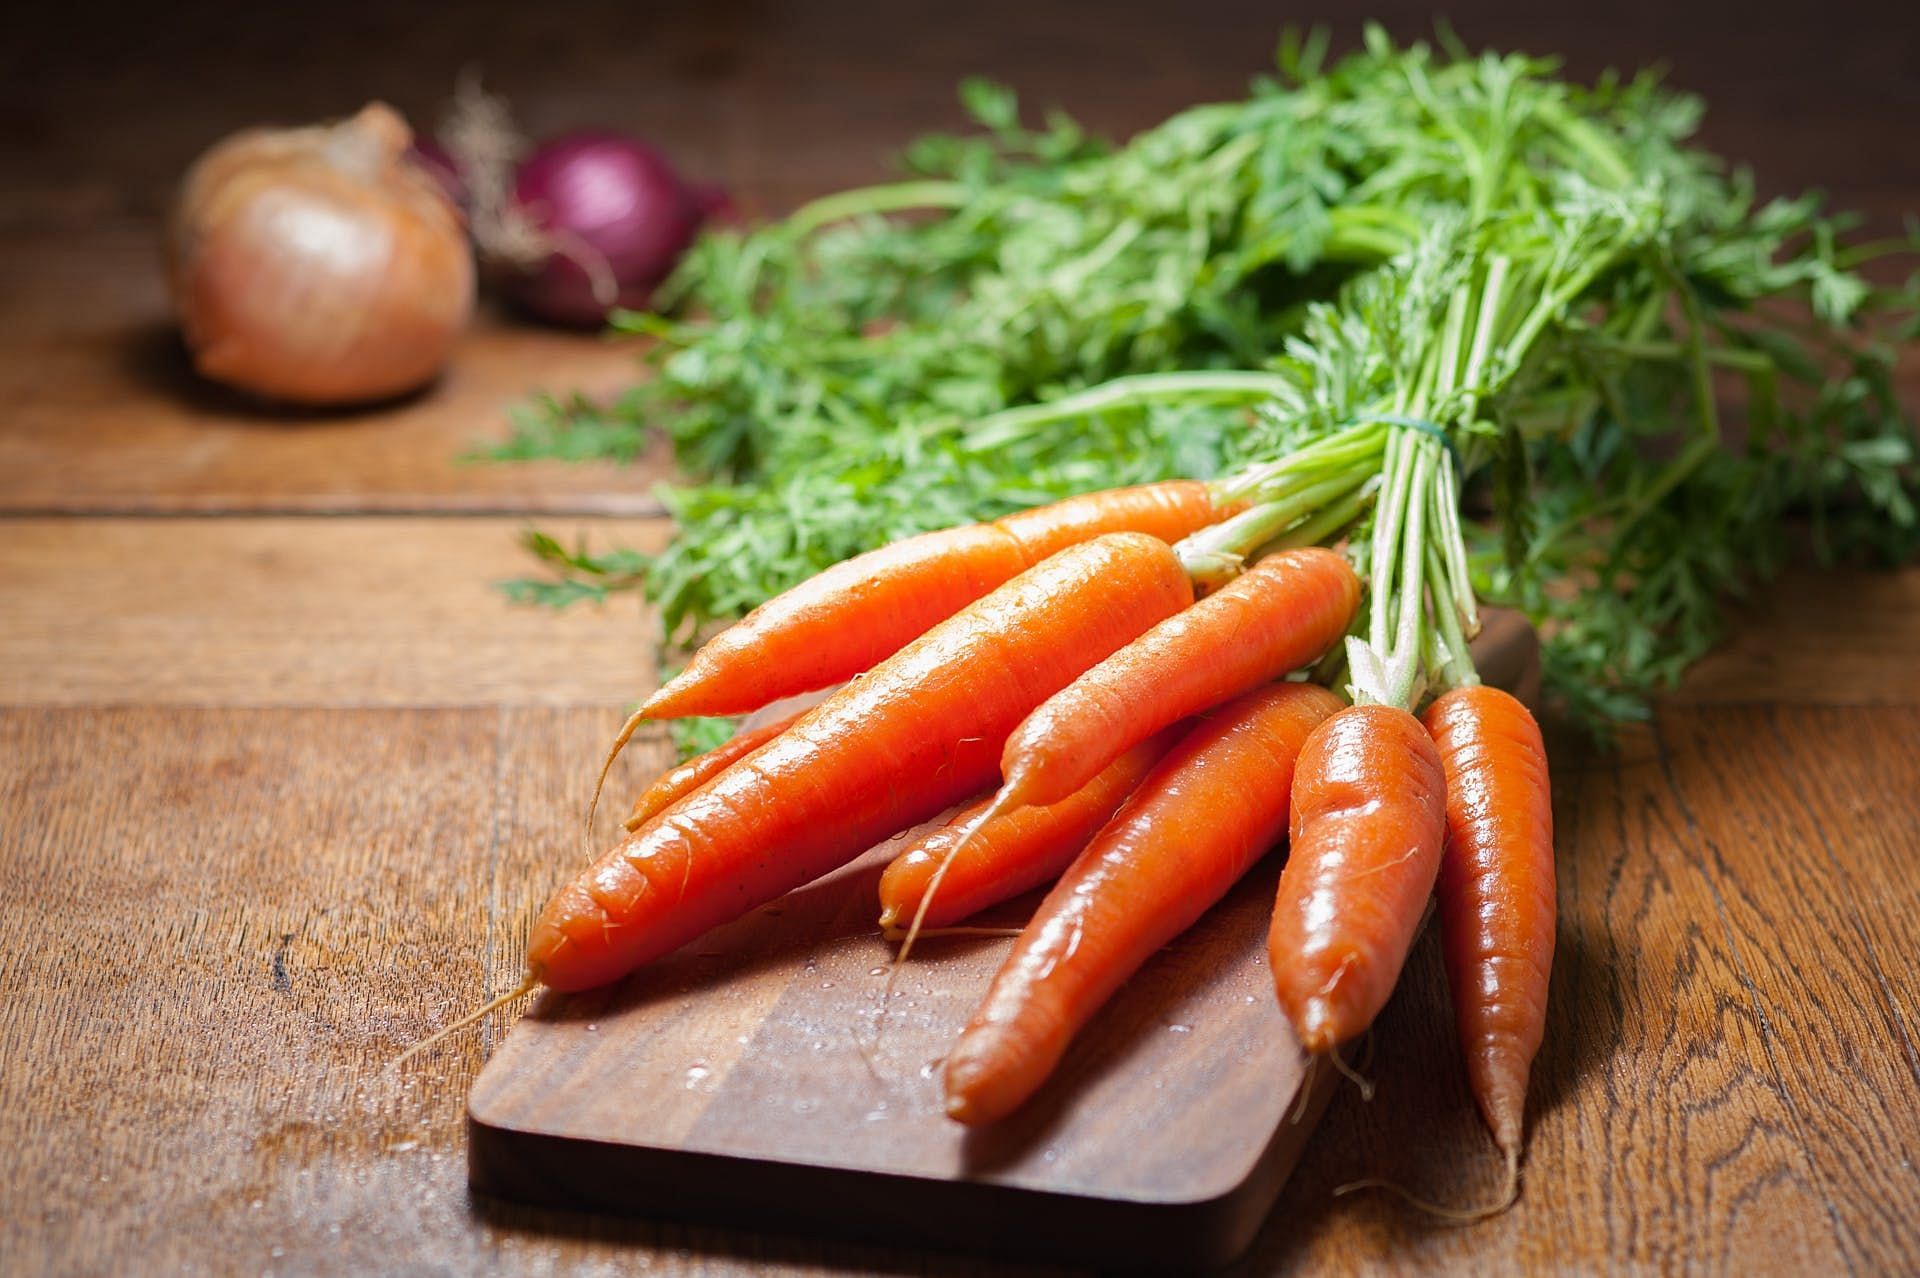 8 Vegetables to burn belly fat (image sourced via Pexels / Photo by mali)